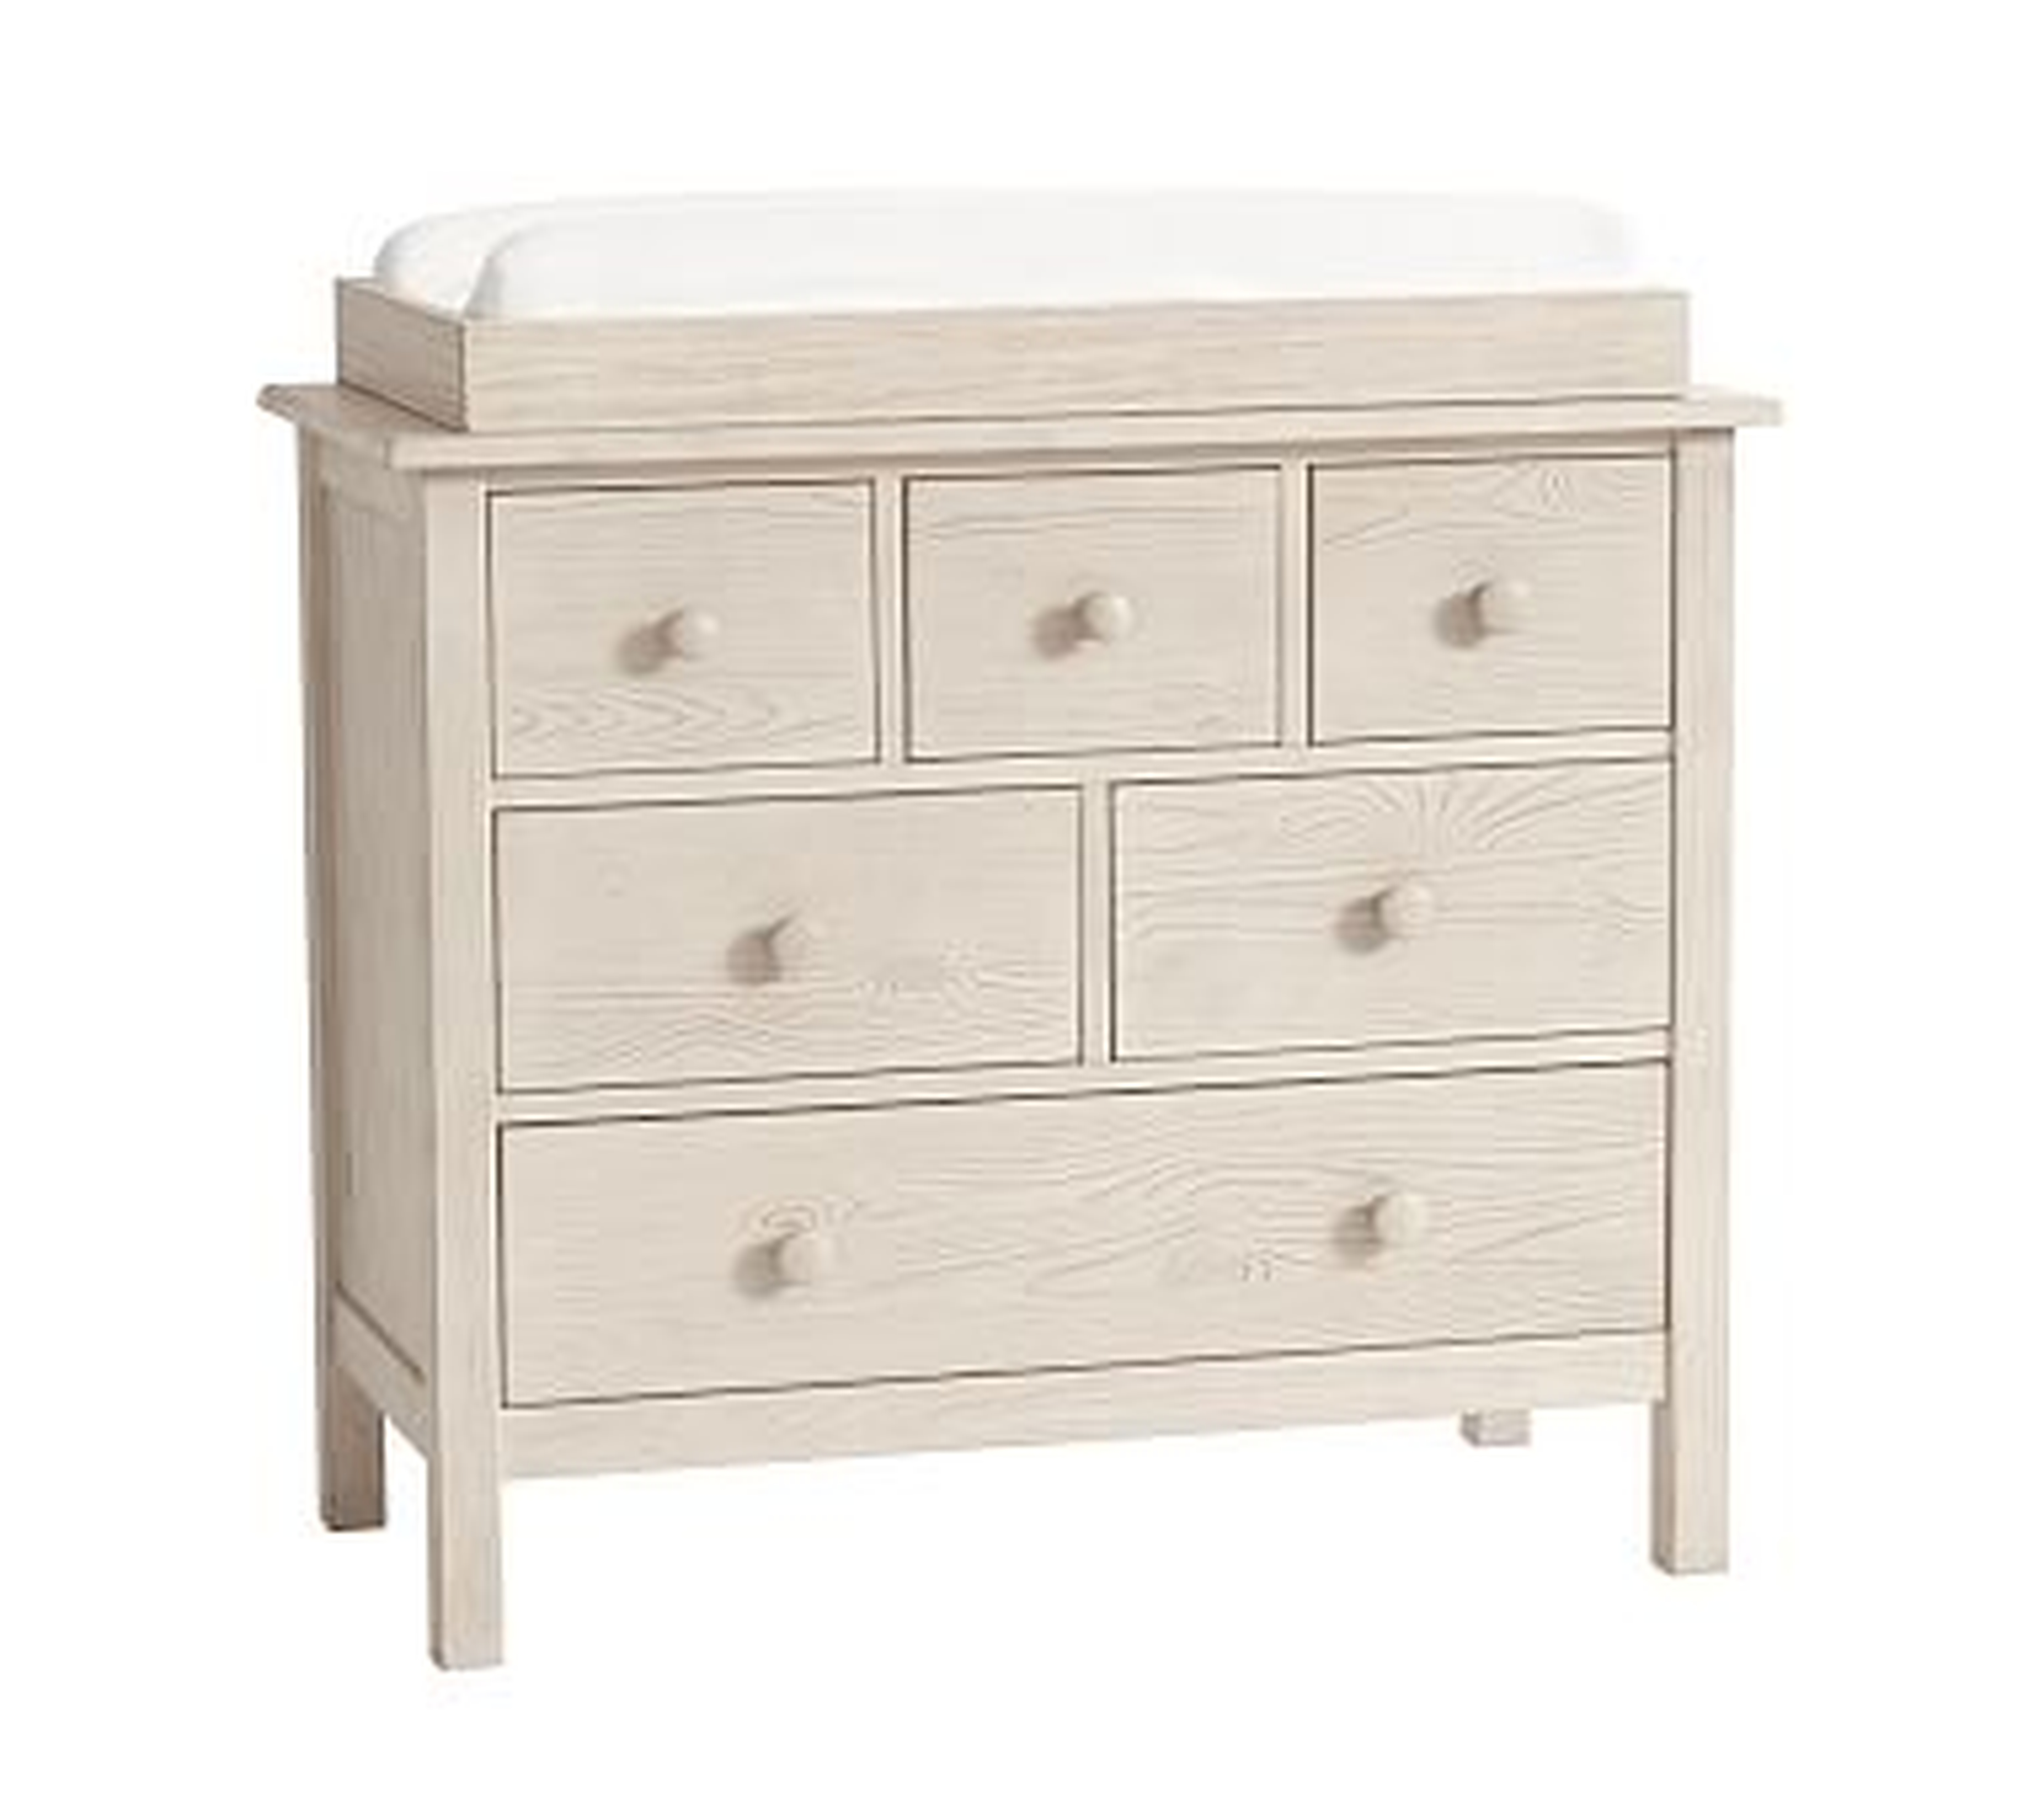 Kendall Nursery Dresser & Topper Set, Weathered White, In-Home Delivery - Pottery Barn Kids